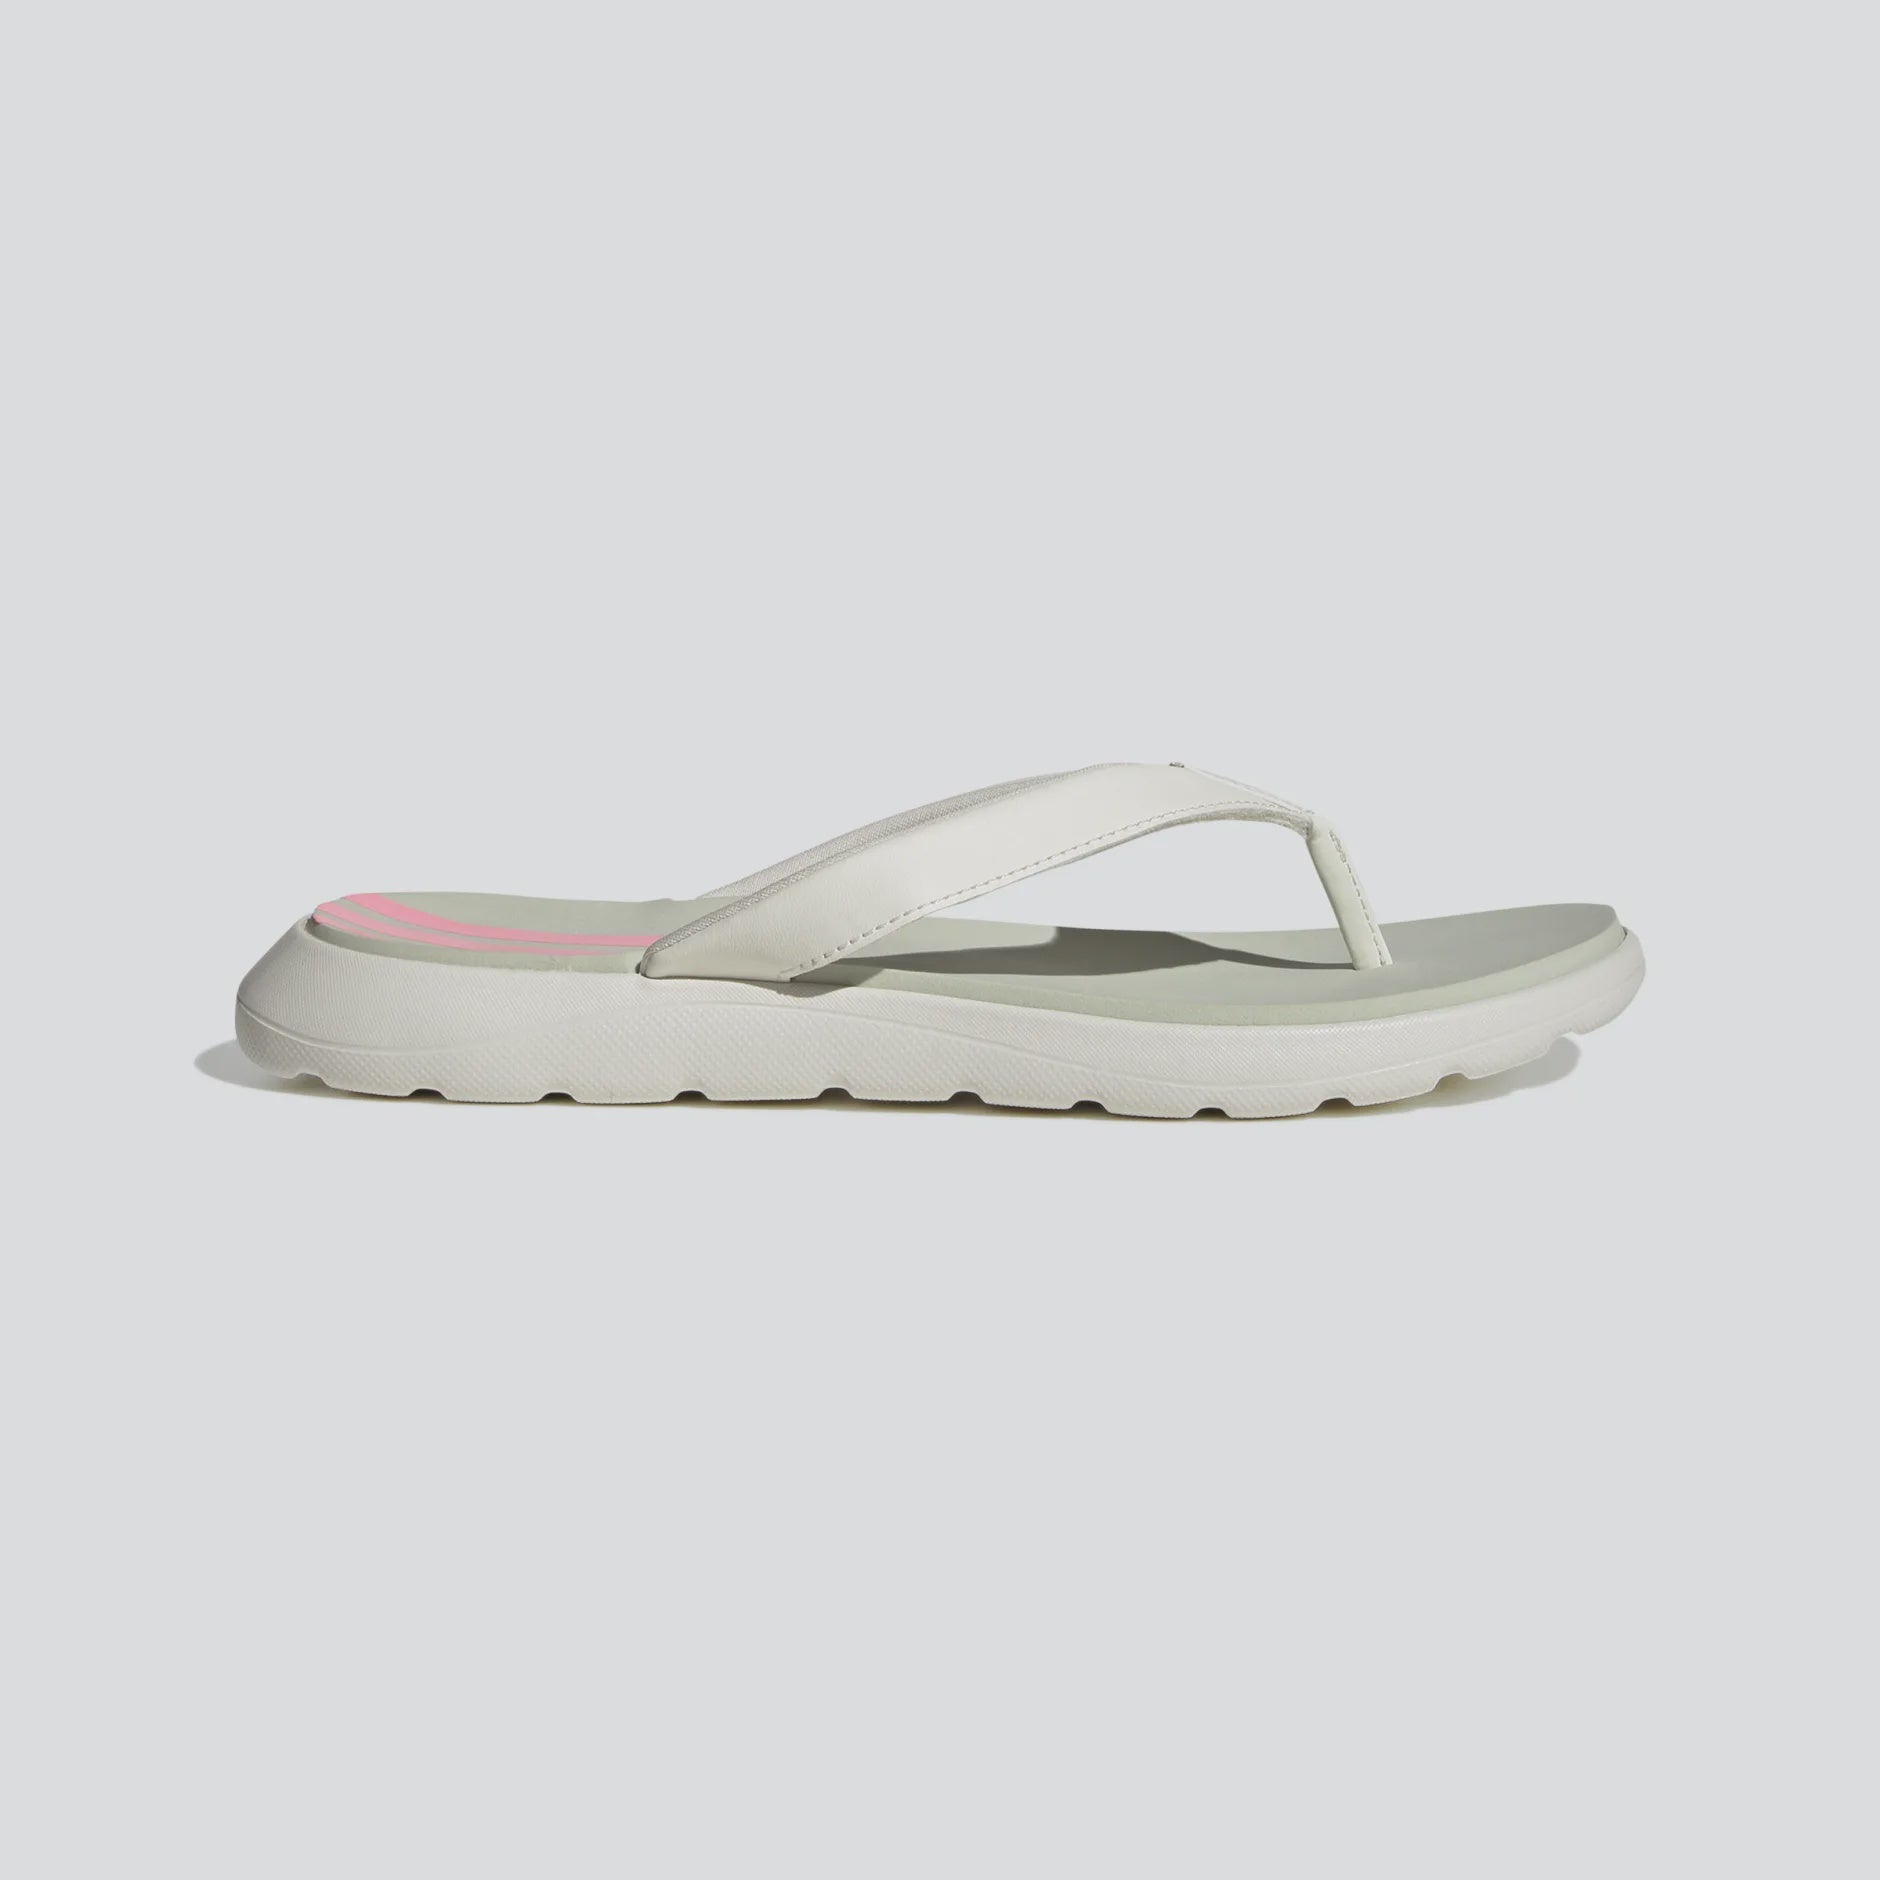 ADIDAS FLIP FLOP - GY1825 - Your Online Fashion Retail Store